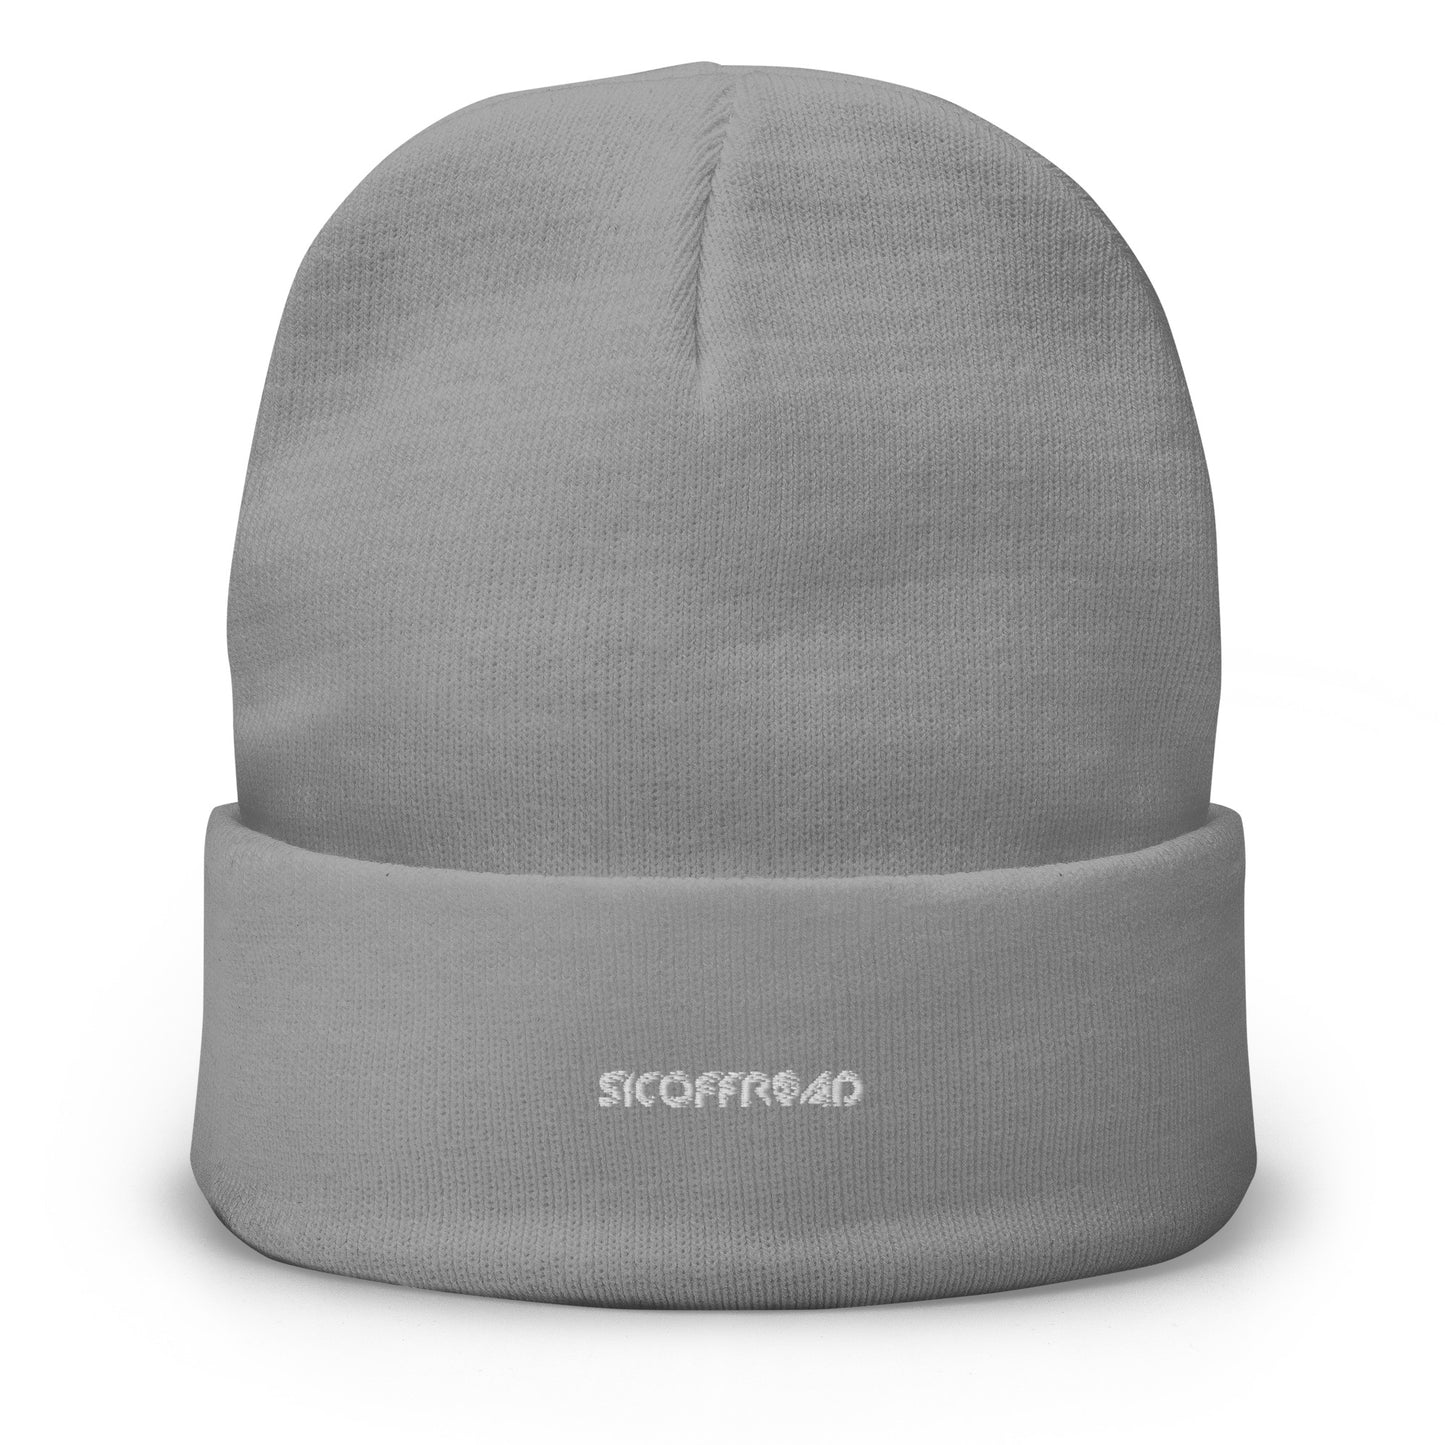 Sicoffroad Embroidered Beanie